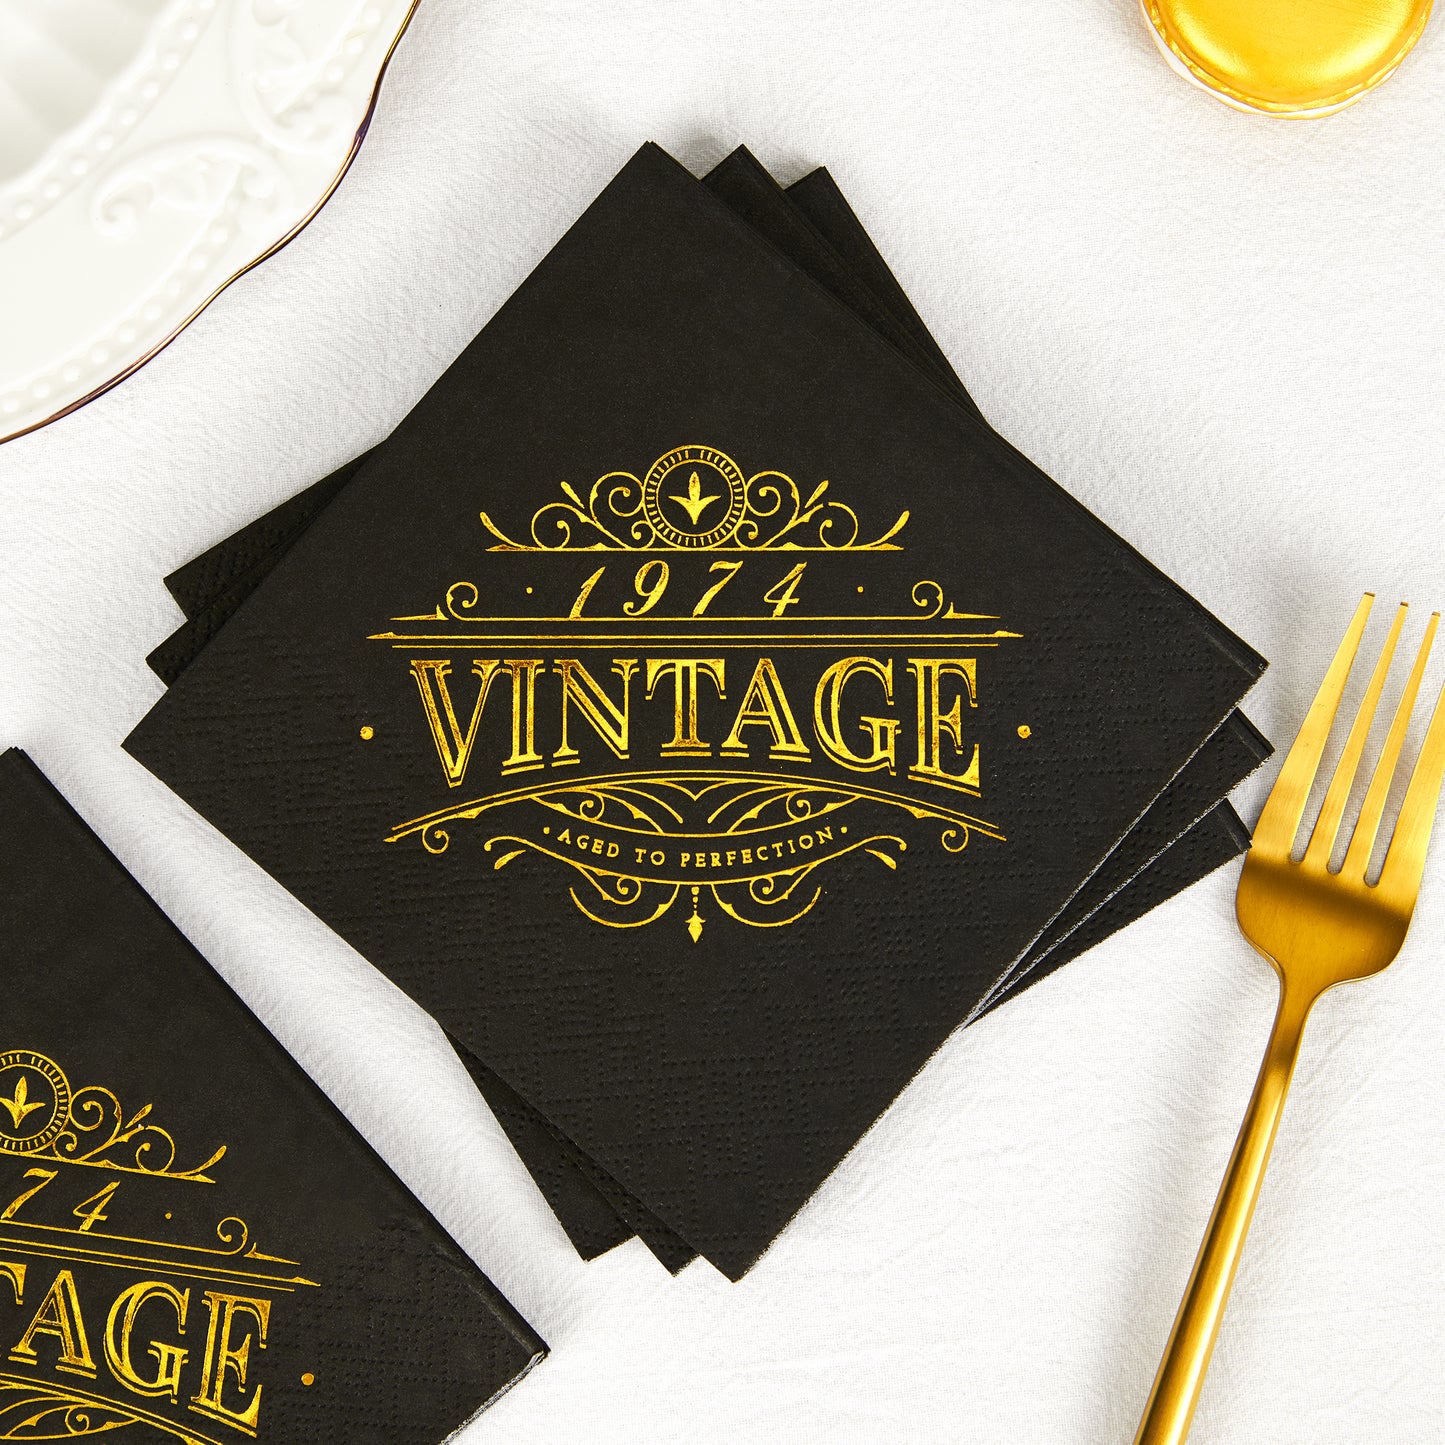 Crisky 50th Birthday Napkins Table Decorations Black Gold Vintage 1974 Beverage Dessert Cake Table Decorations Party Supplies 50 Count, 3-ply